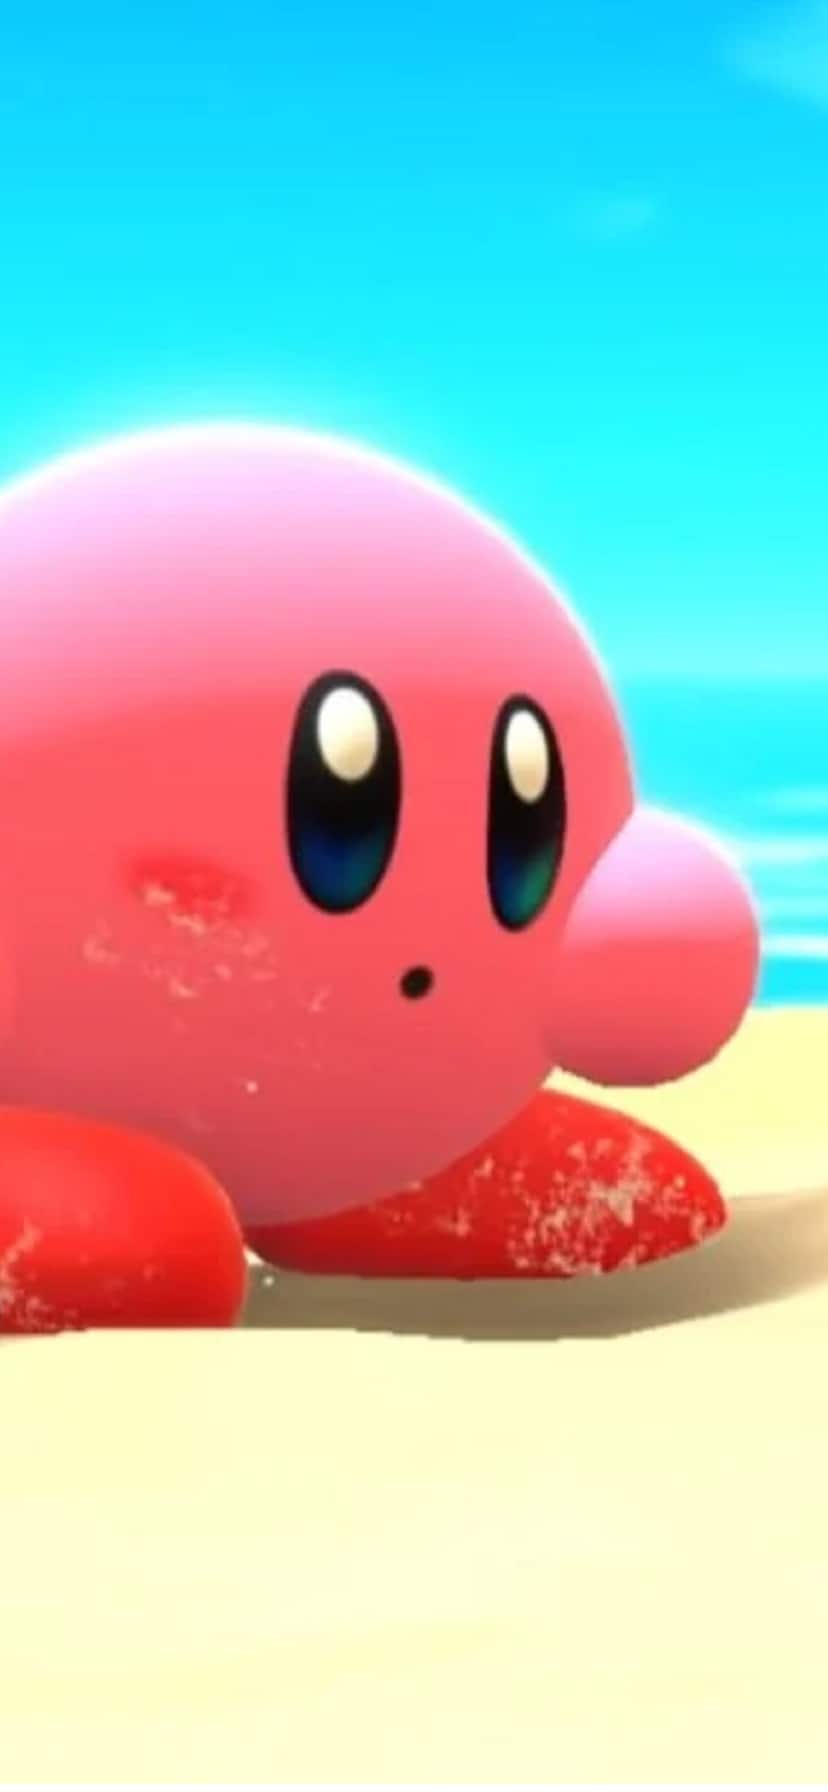 Kirby and the Forgotten Land release date